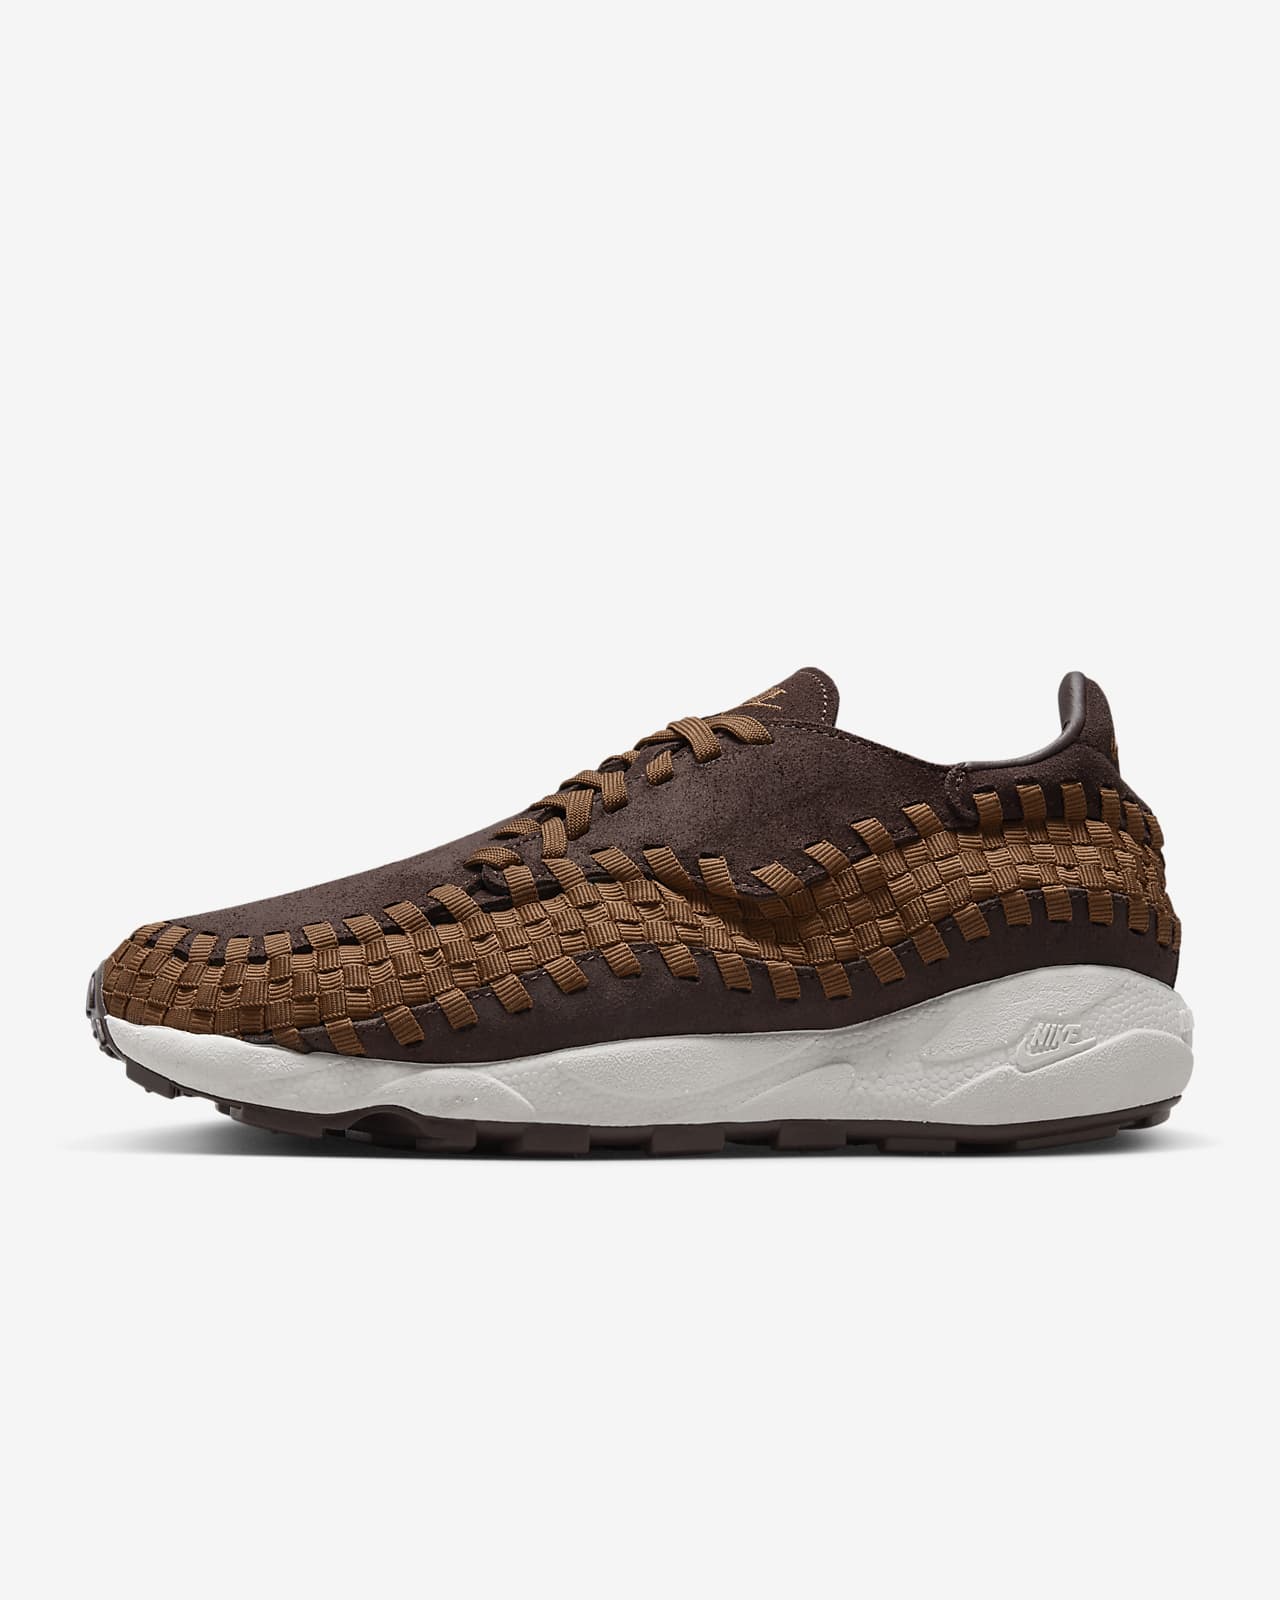 Nike Air Footscape Woven Women's Shoes